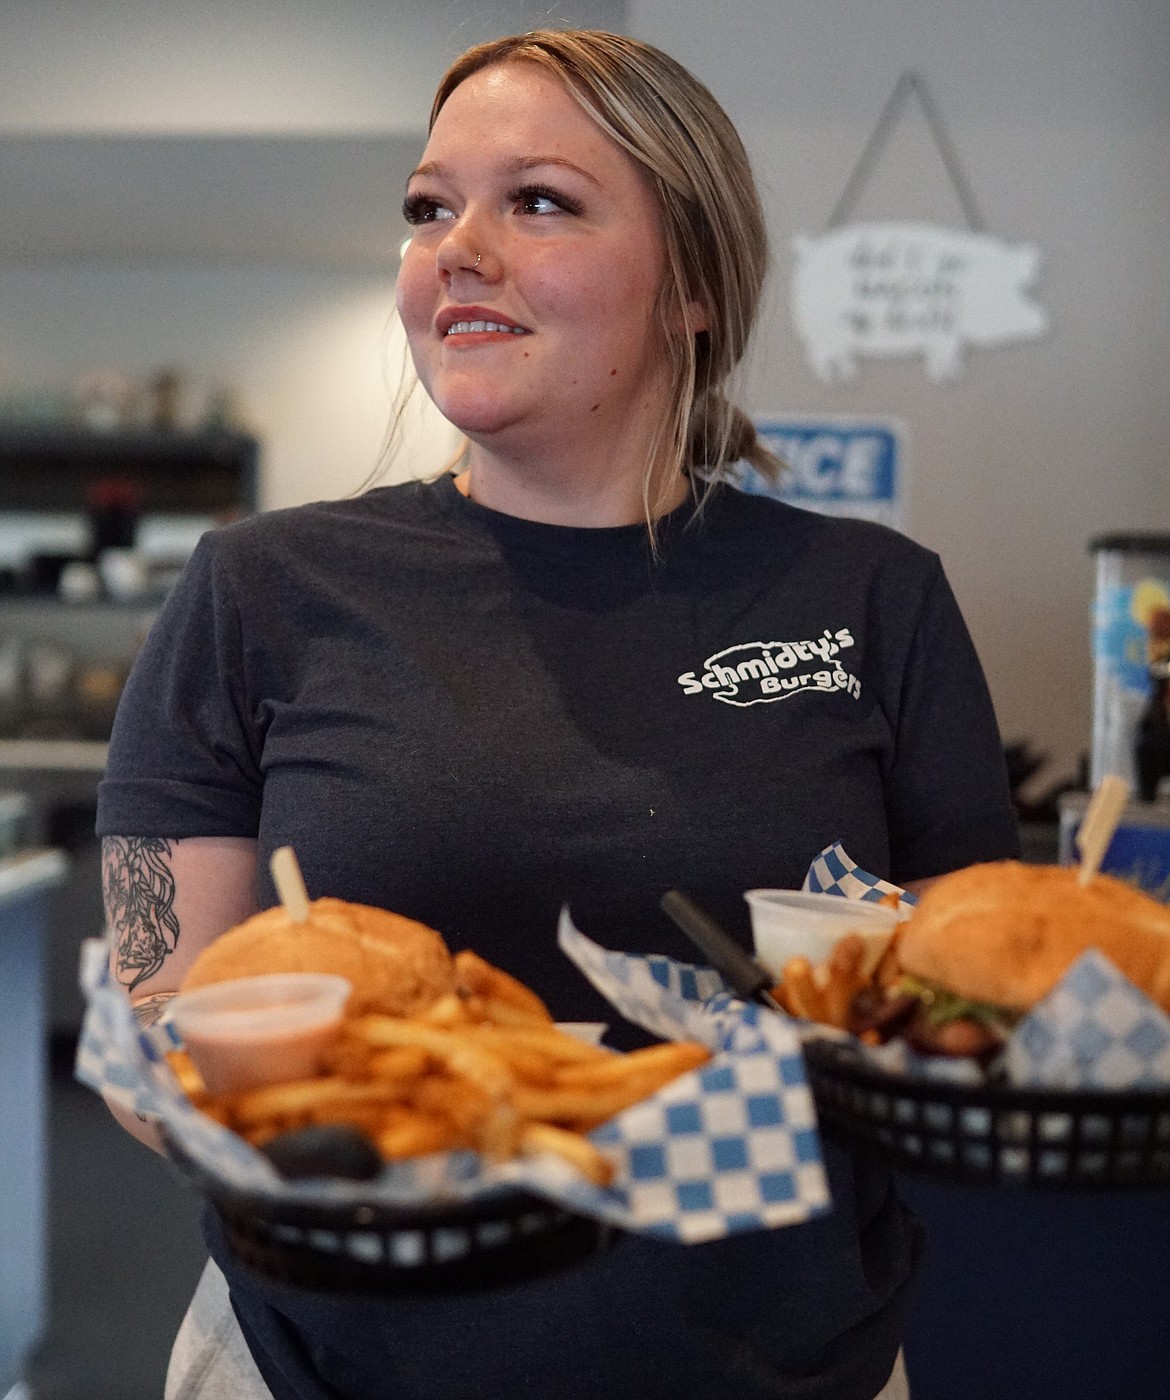 Hailey Reuter carries orders out to customers at Schmidty's Burgers on Friday.  Reuter has worker for Schmidty's for four years.